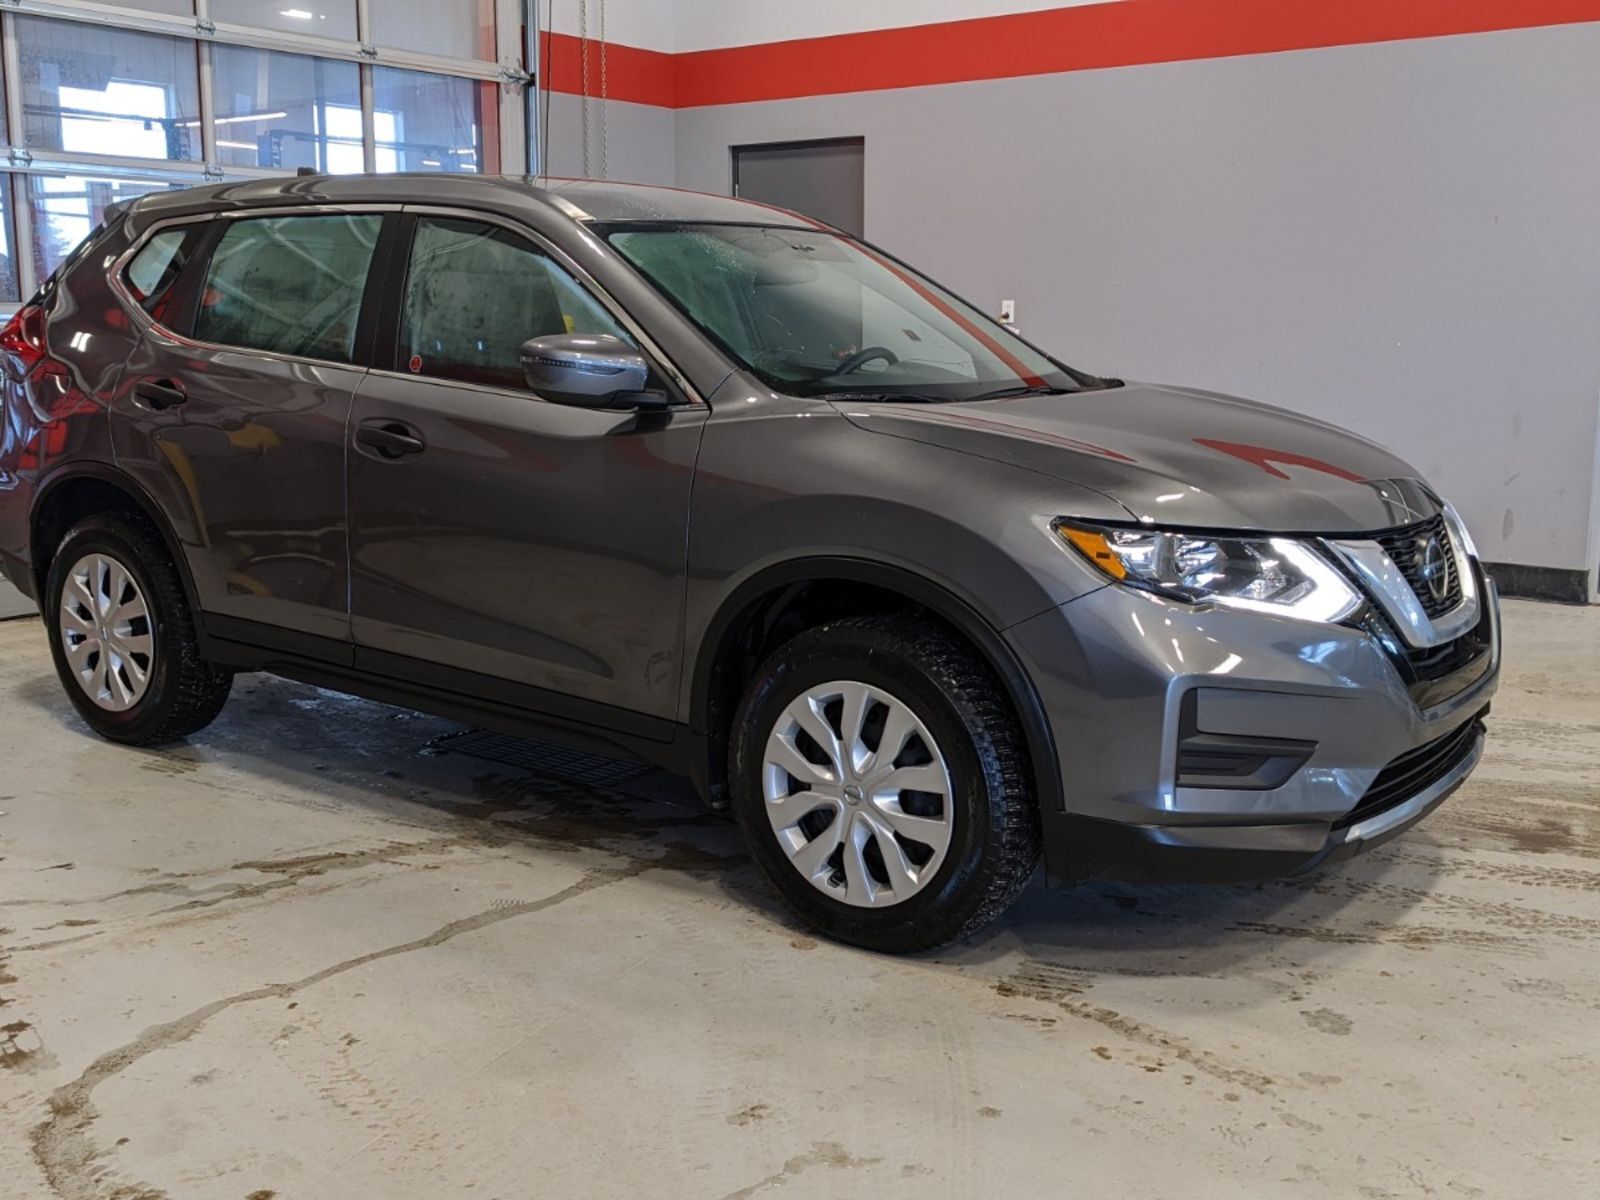 2019 Nissan Rogue S - Heated seats, remote starter, AWD